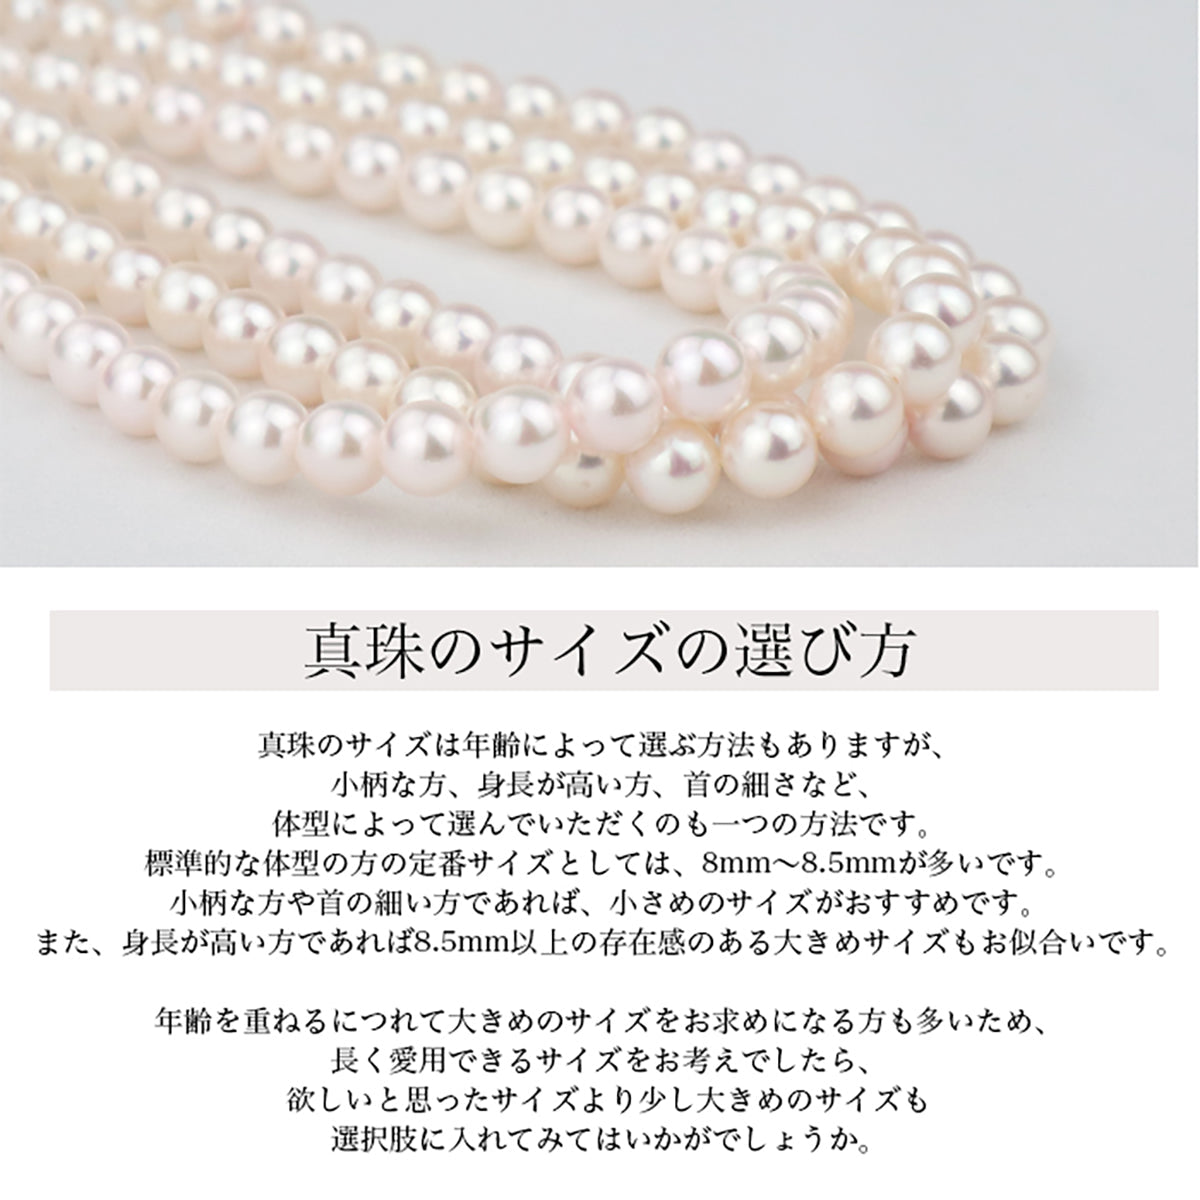 [Metal allergy compatible] Akoya pearl formal necklace 2-piece set [7.0-7.5mm] (Earrings/Non-pierced earrings) Formal set with certificate of authenticity and storage case